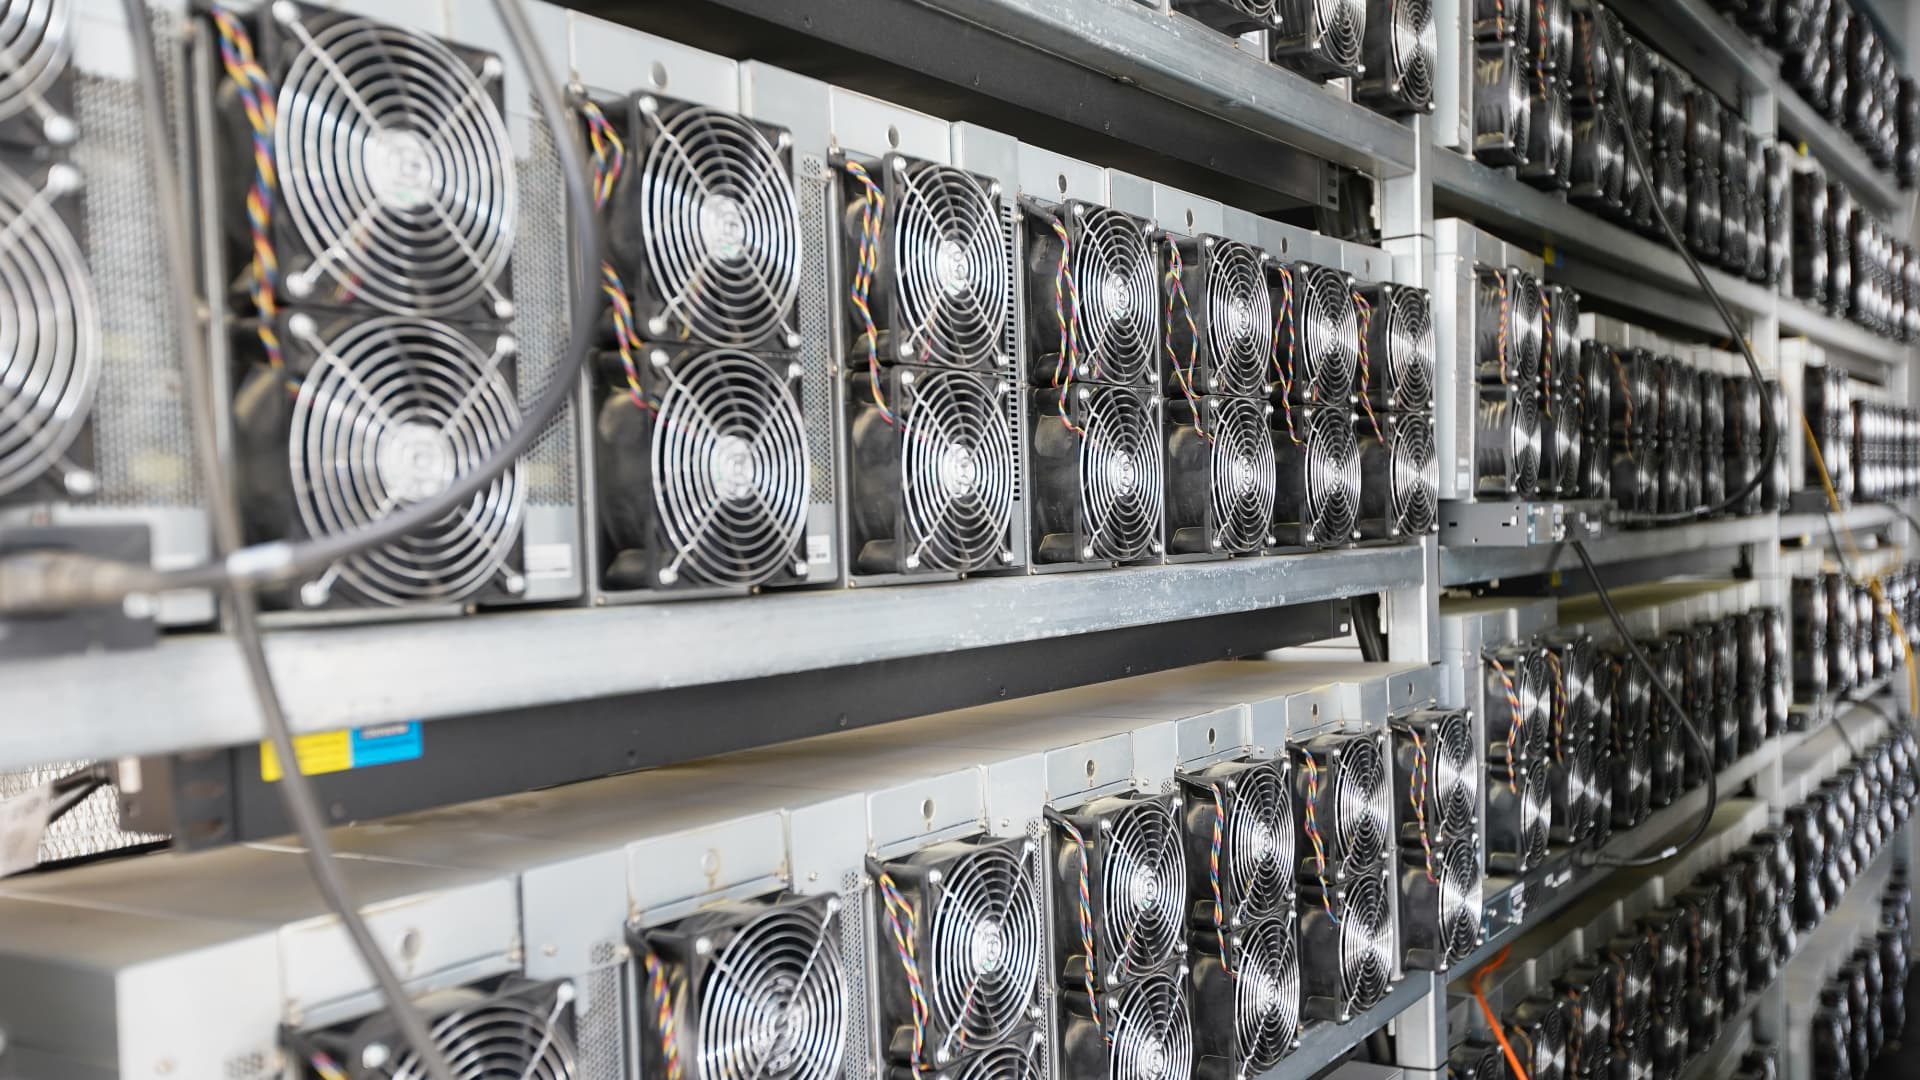 Bitcoin faces headwinds challenging miners in near term, says JPMorgan [Video]